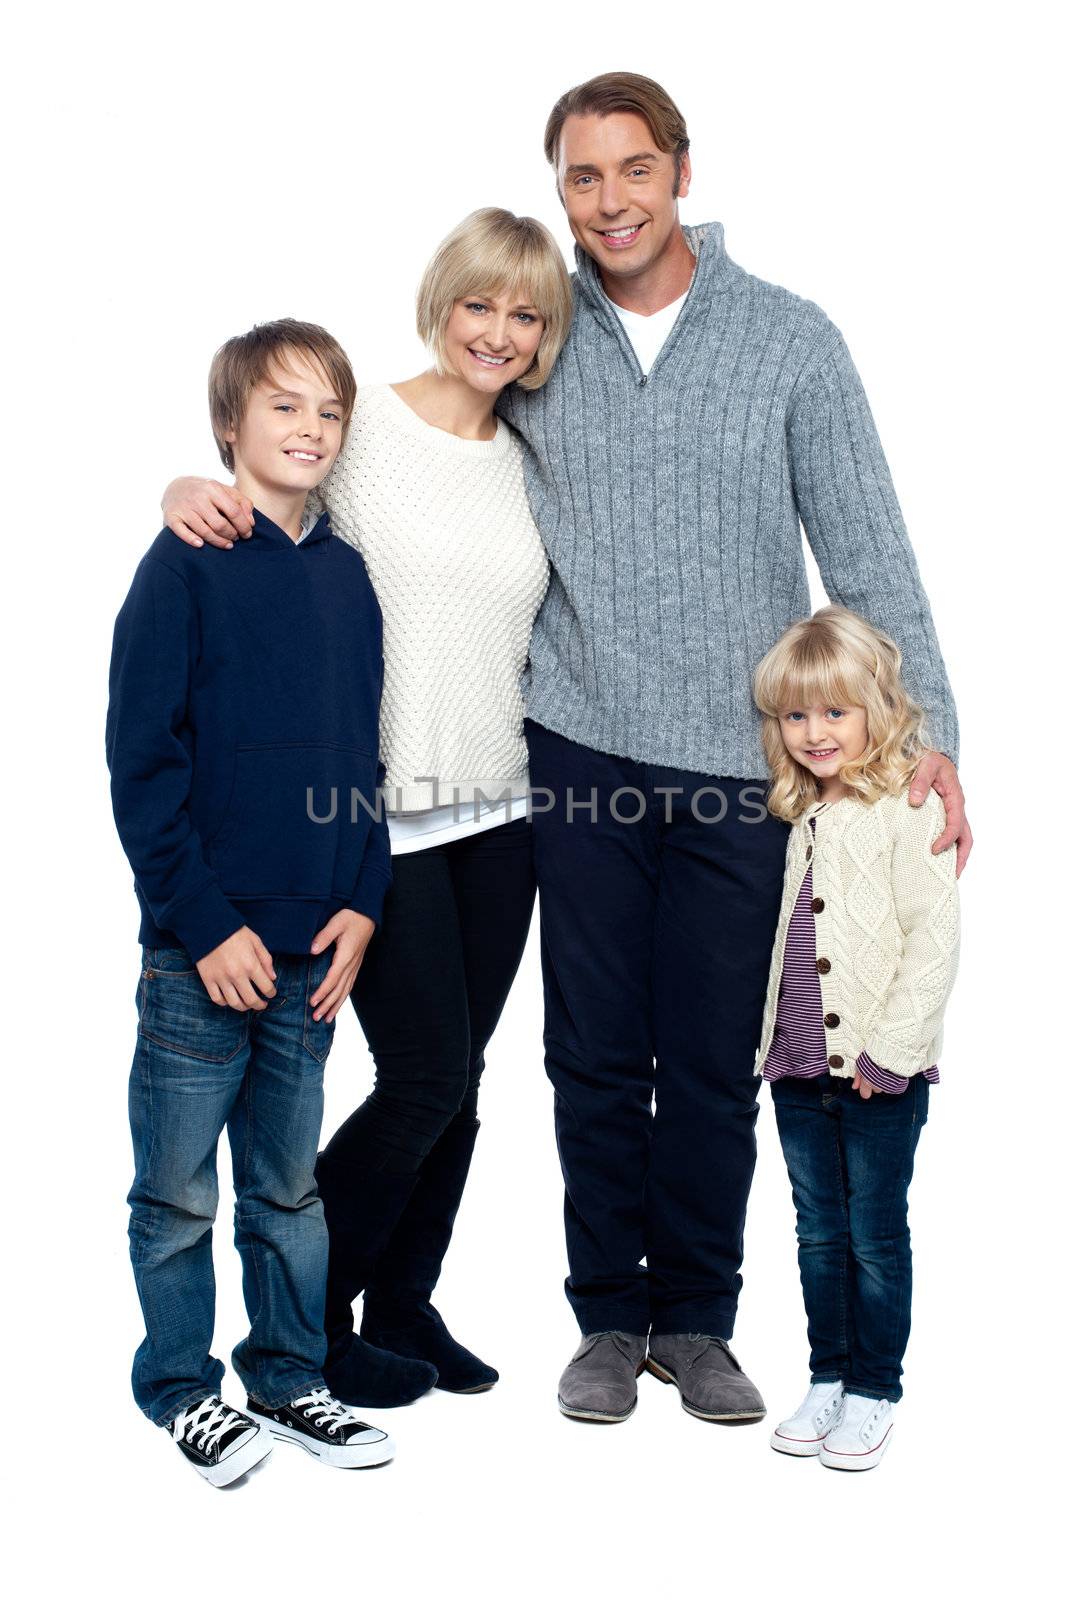 Affectionate family feeling the warmth of love, standing close to each other.